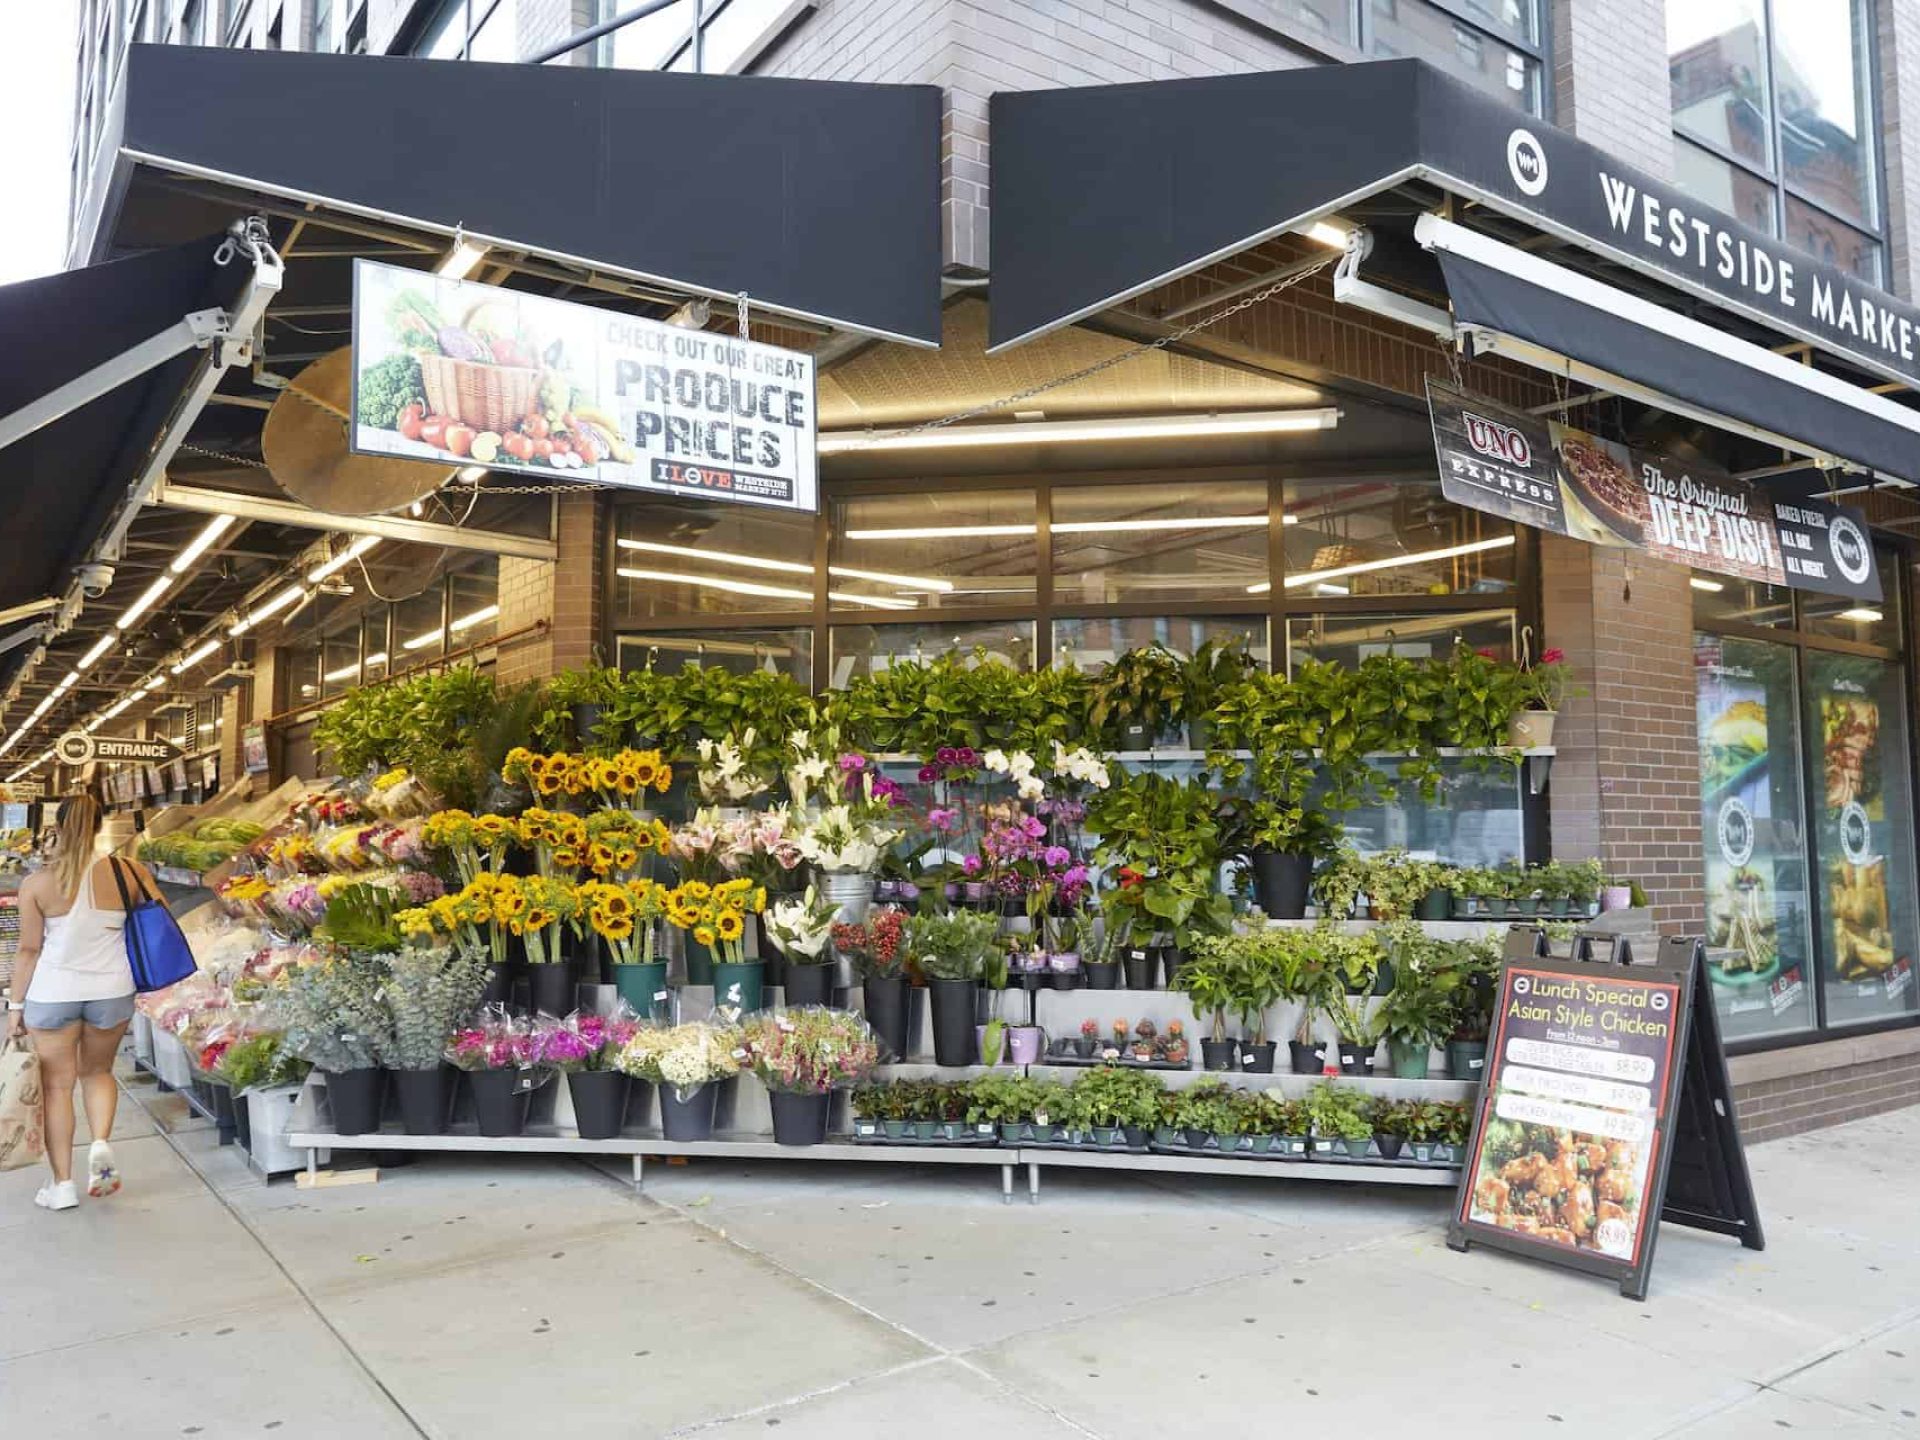 Flower display on the sidewalk outside of Westside Market in Brooklyn. Tiered flower display, hanging banners and an A-board.